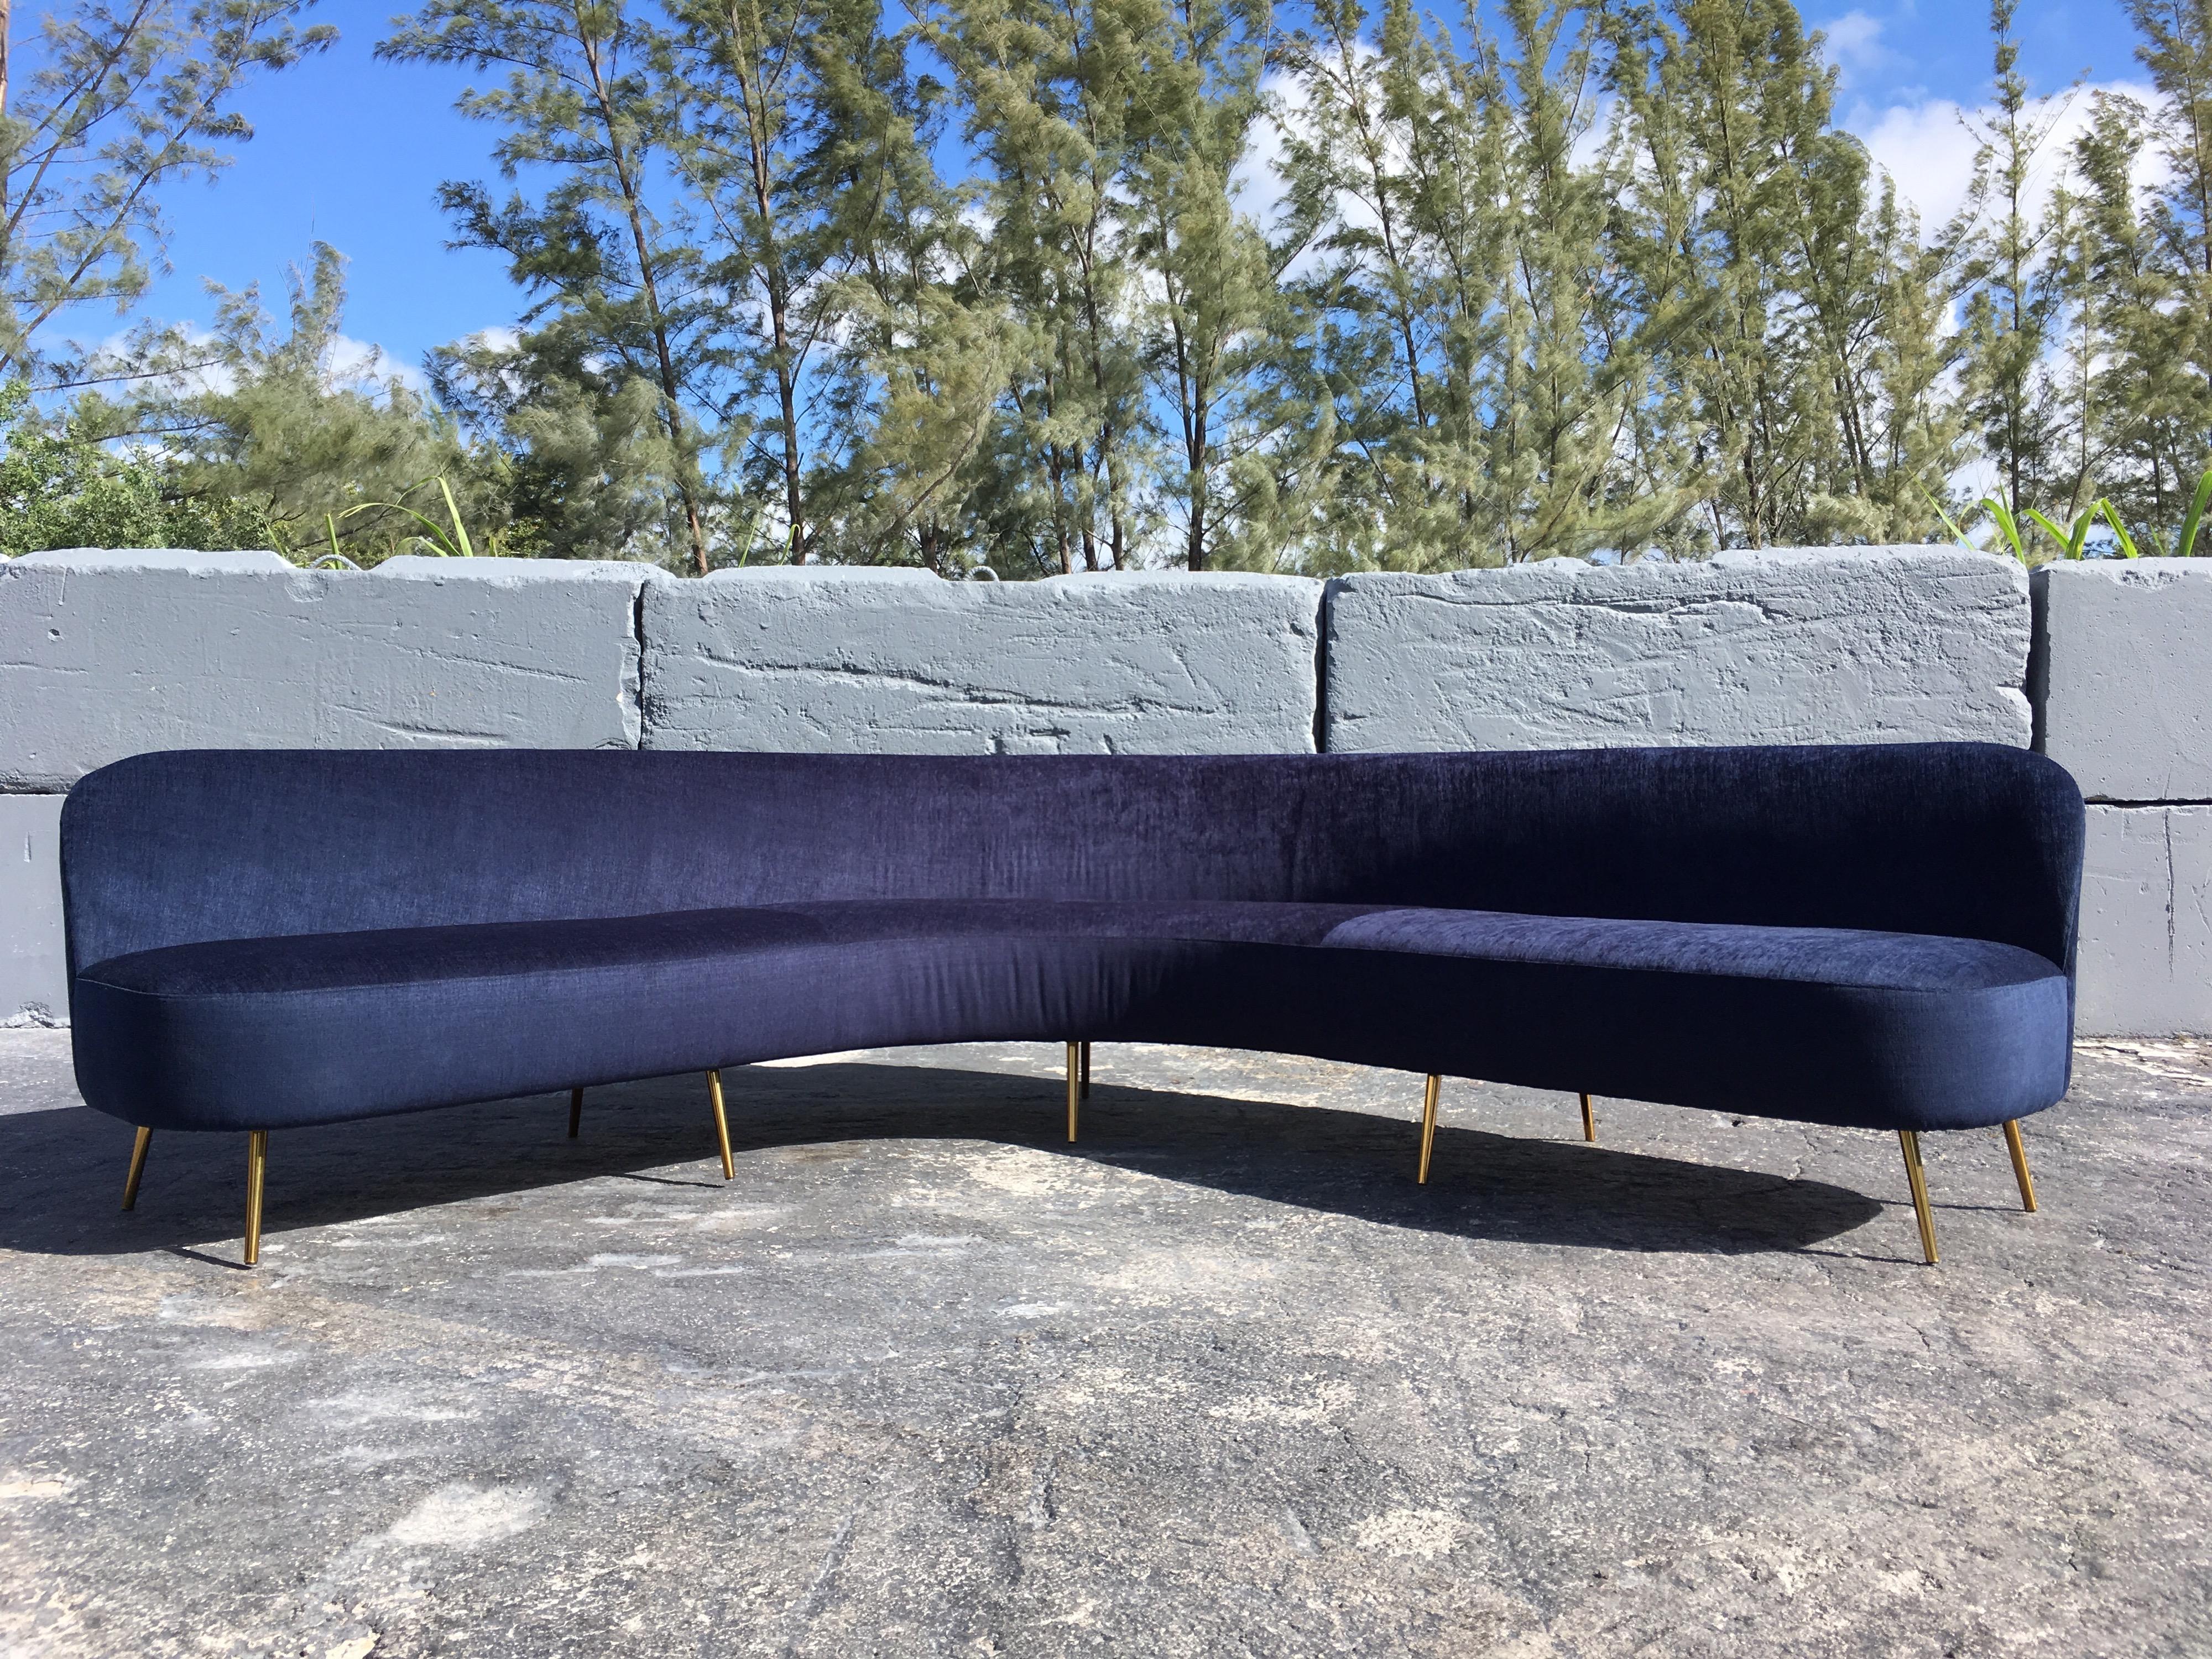 Beautiful large organic sofa standing on ten brass plated legs. The dark blue Knoll fabric is new, in some pictures the fabric may appear purple but it really is more a dark blue. Great sofa and ready for a new home.